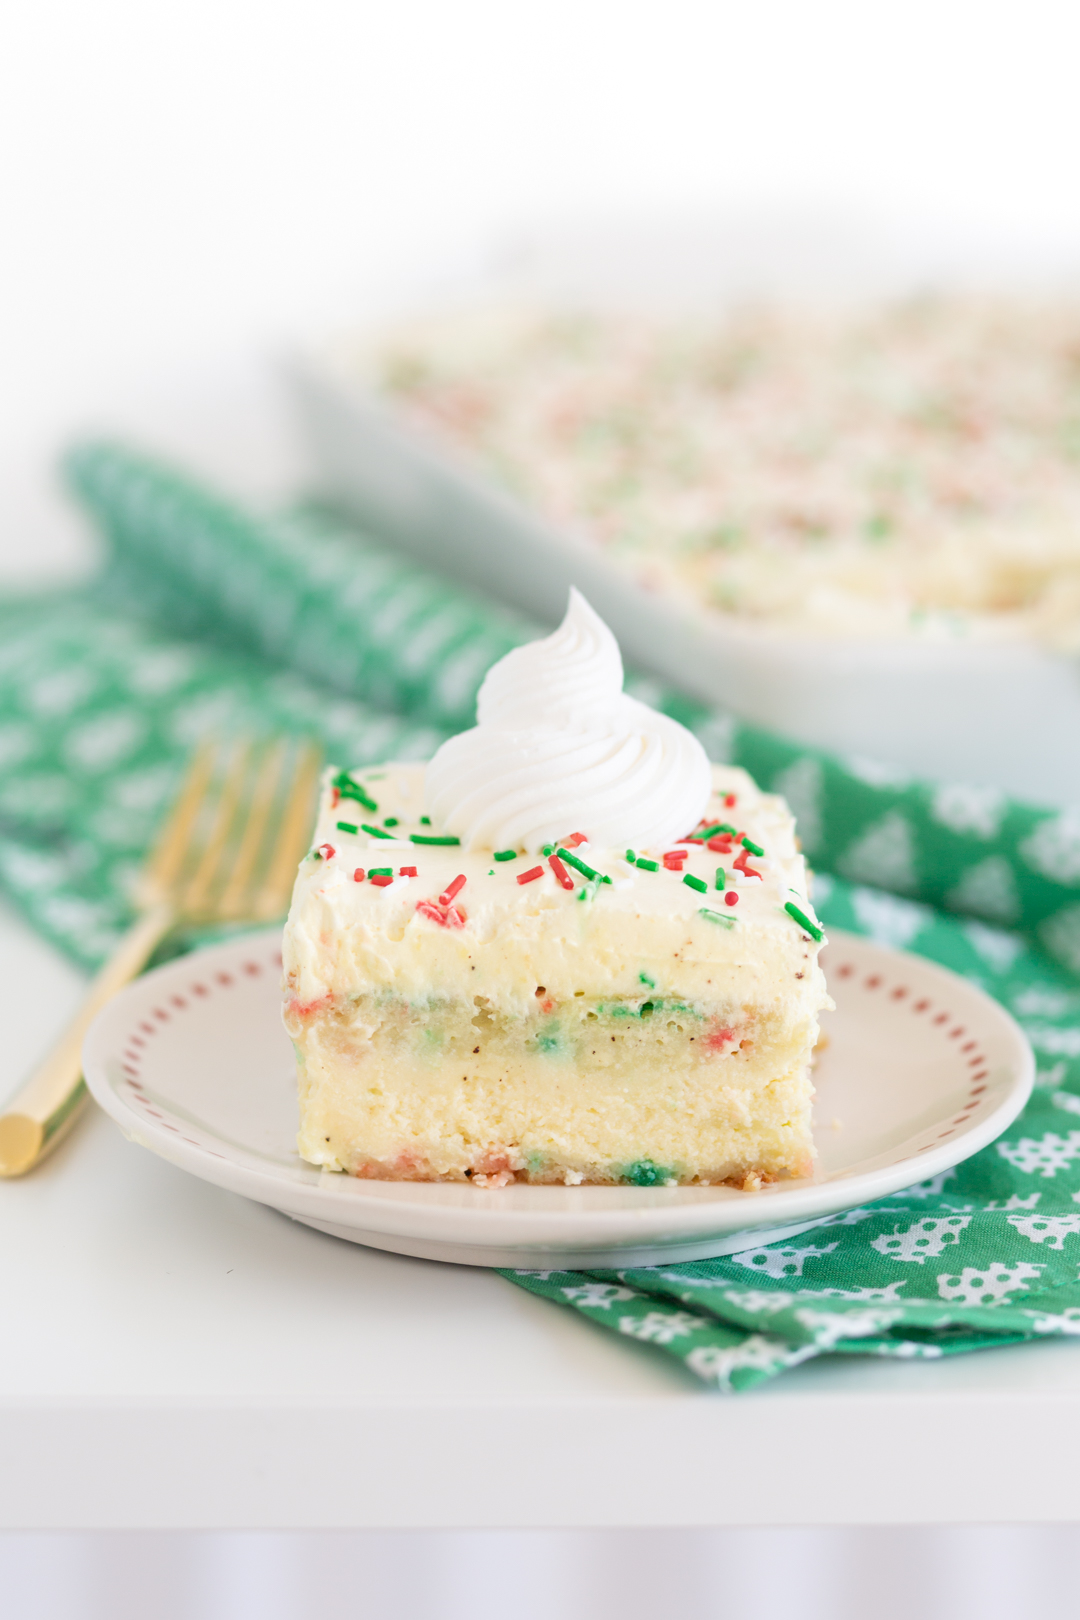 slice of layered cake on a small festive dish setting on top of a green christmas tree cloth napkin and a gold fork